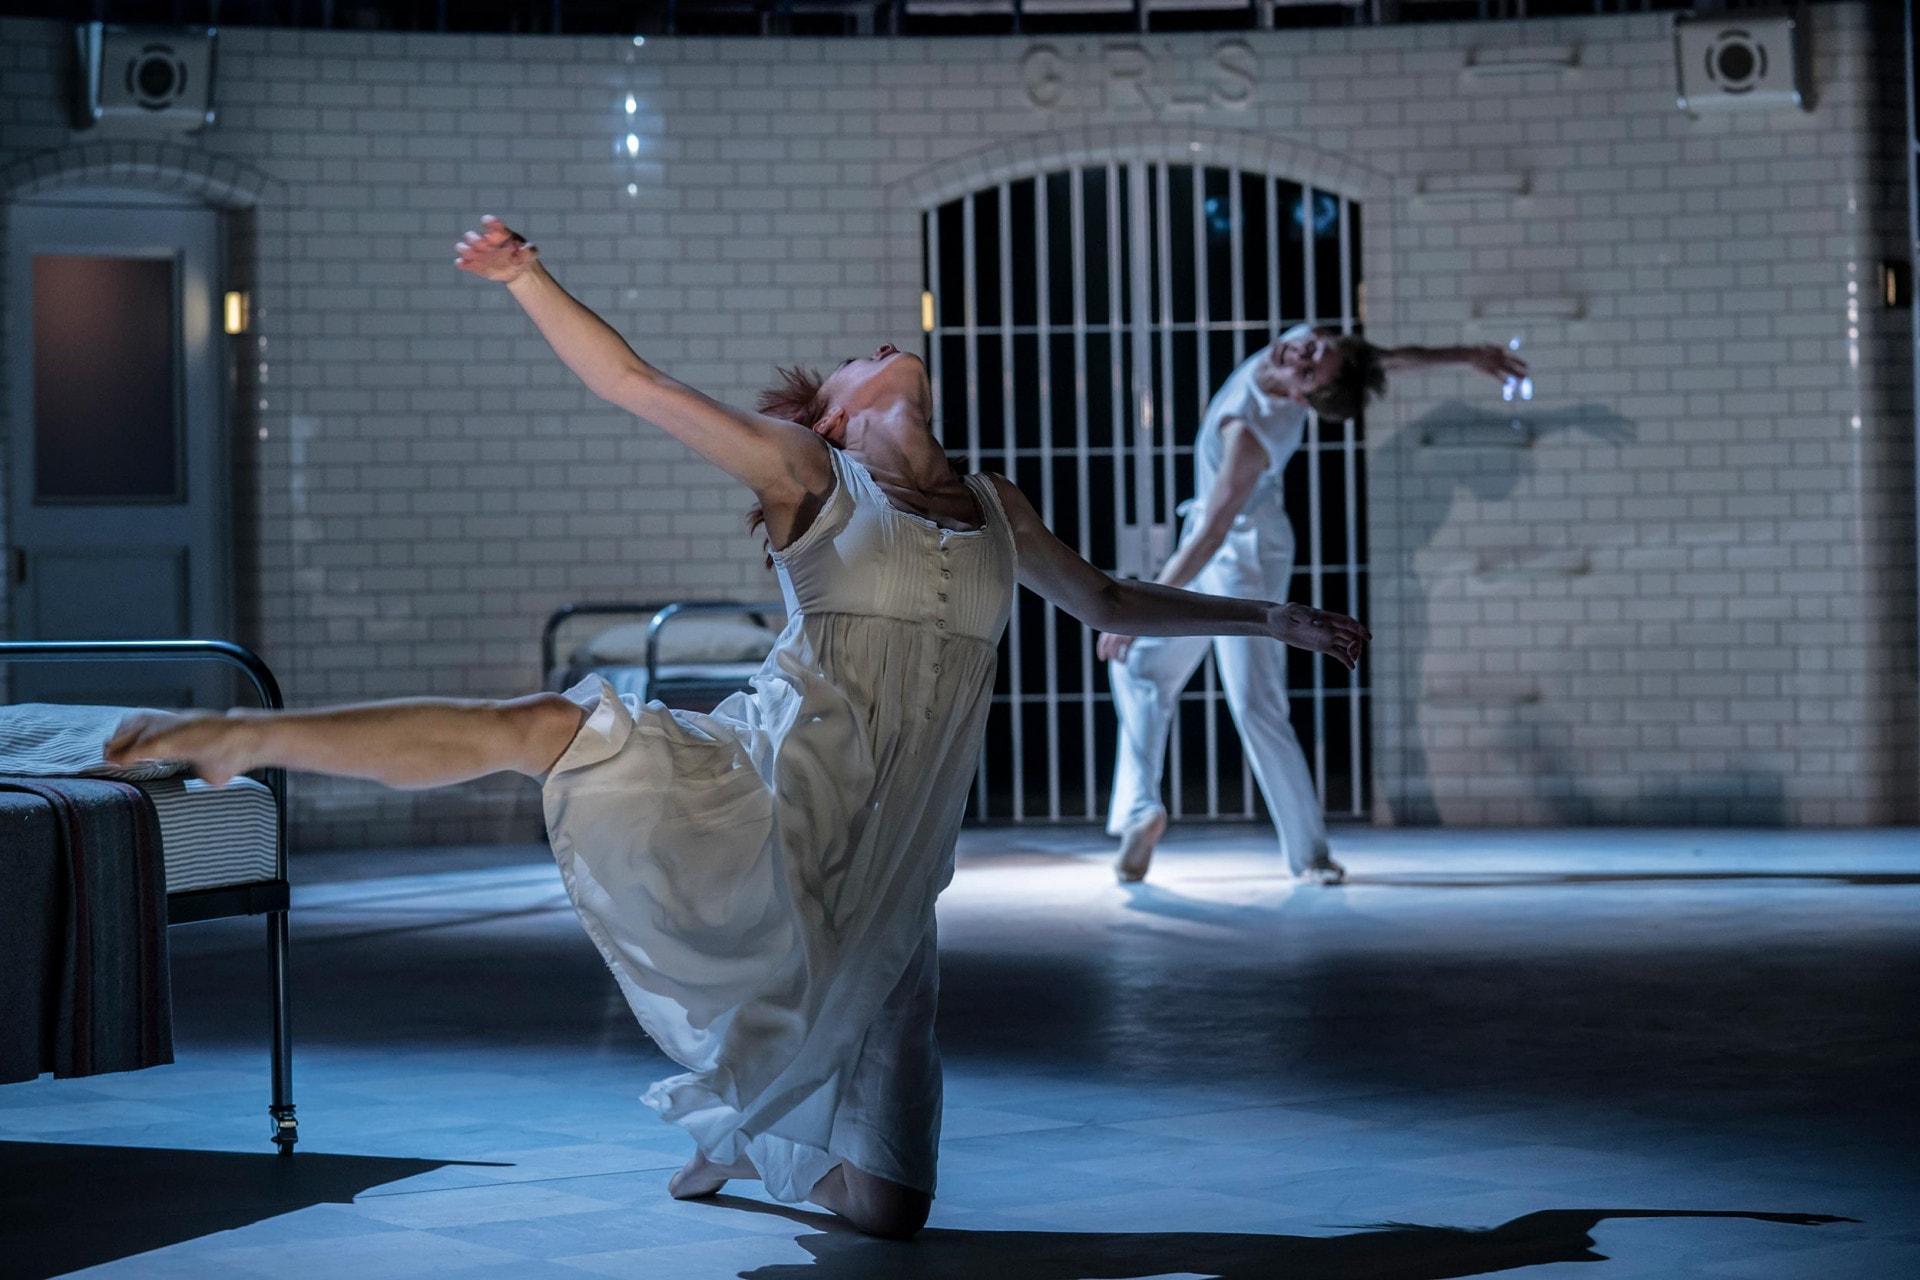 Production photo from Matthew Bourne's Romeo And Juliet